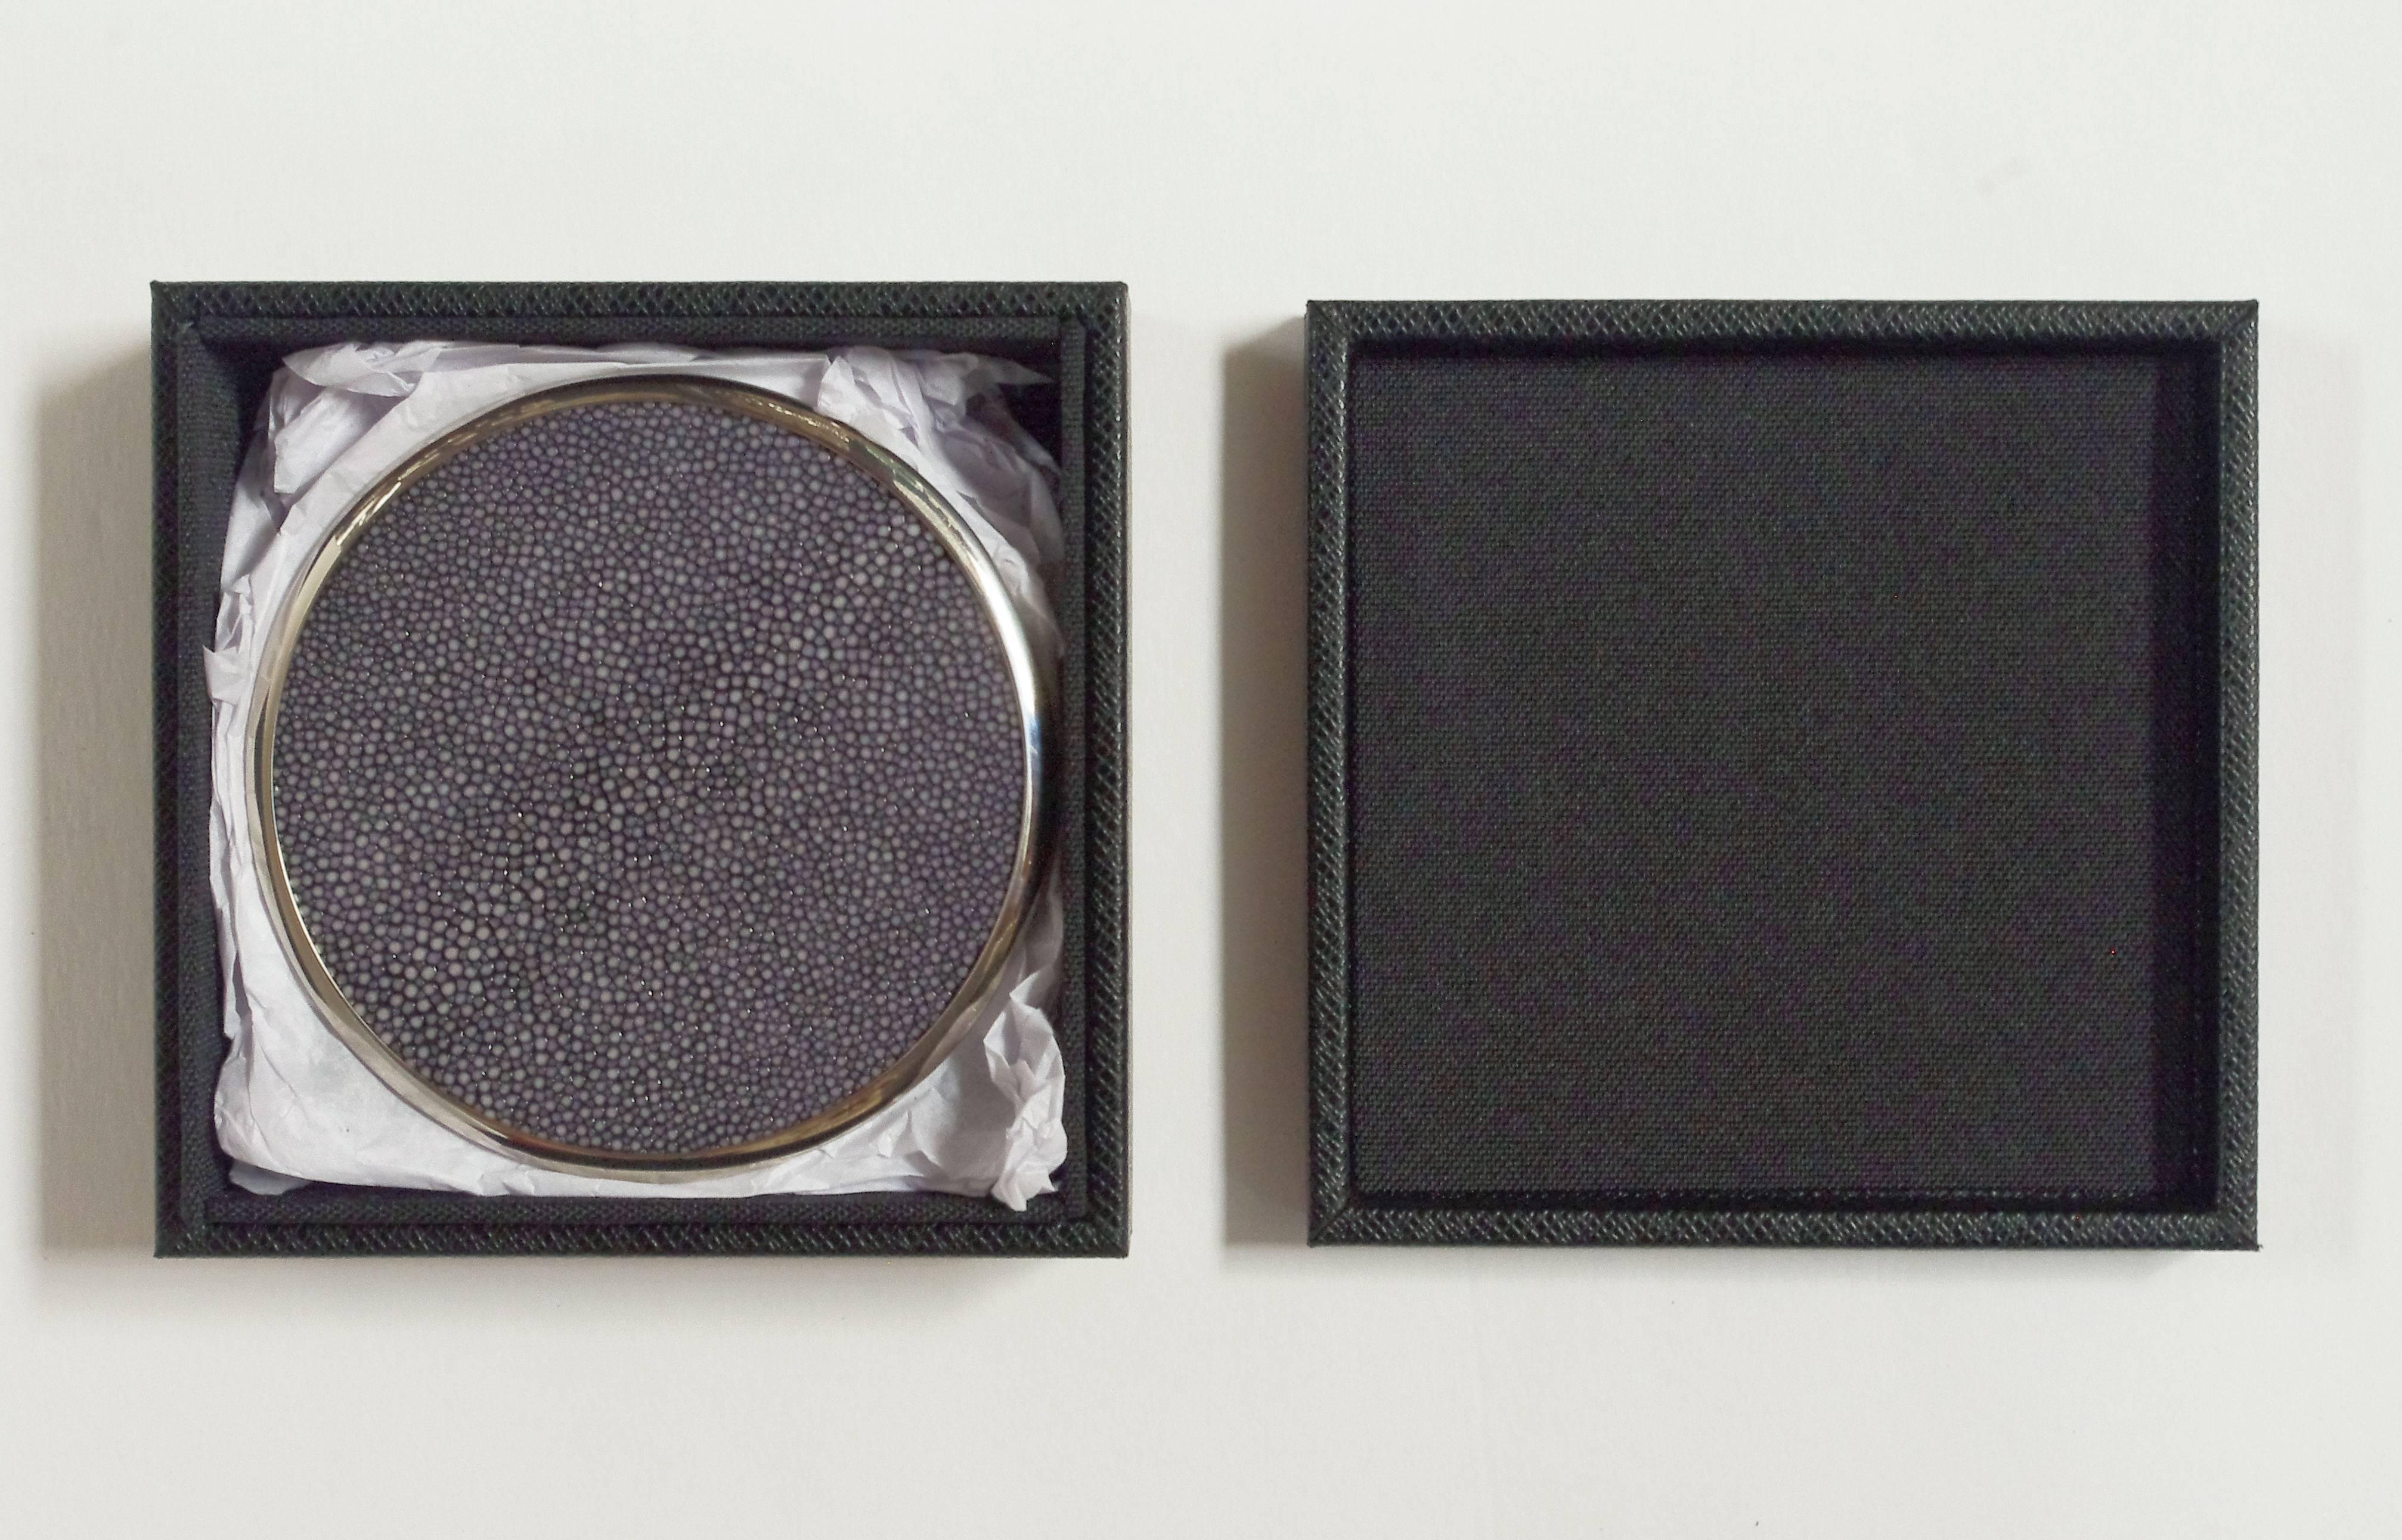 Italian black shagreen and nickel-plated coasters with matching black leather box designed by Fabio Bergomi for Fabio Ltd / Made in Italy
Coaster diameter: 4.5 inches, box depth: 5.5 inches, box width: 5.5 inches, box height: 2.5 inches
1 set in